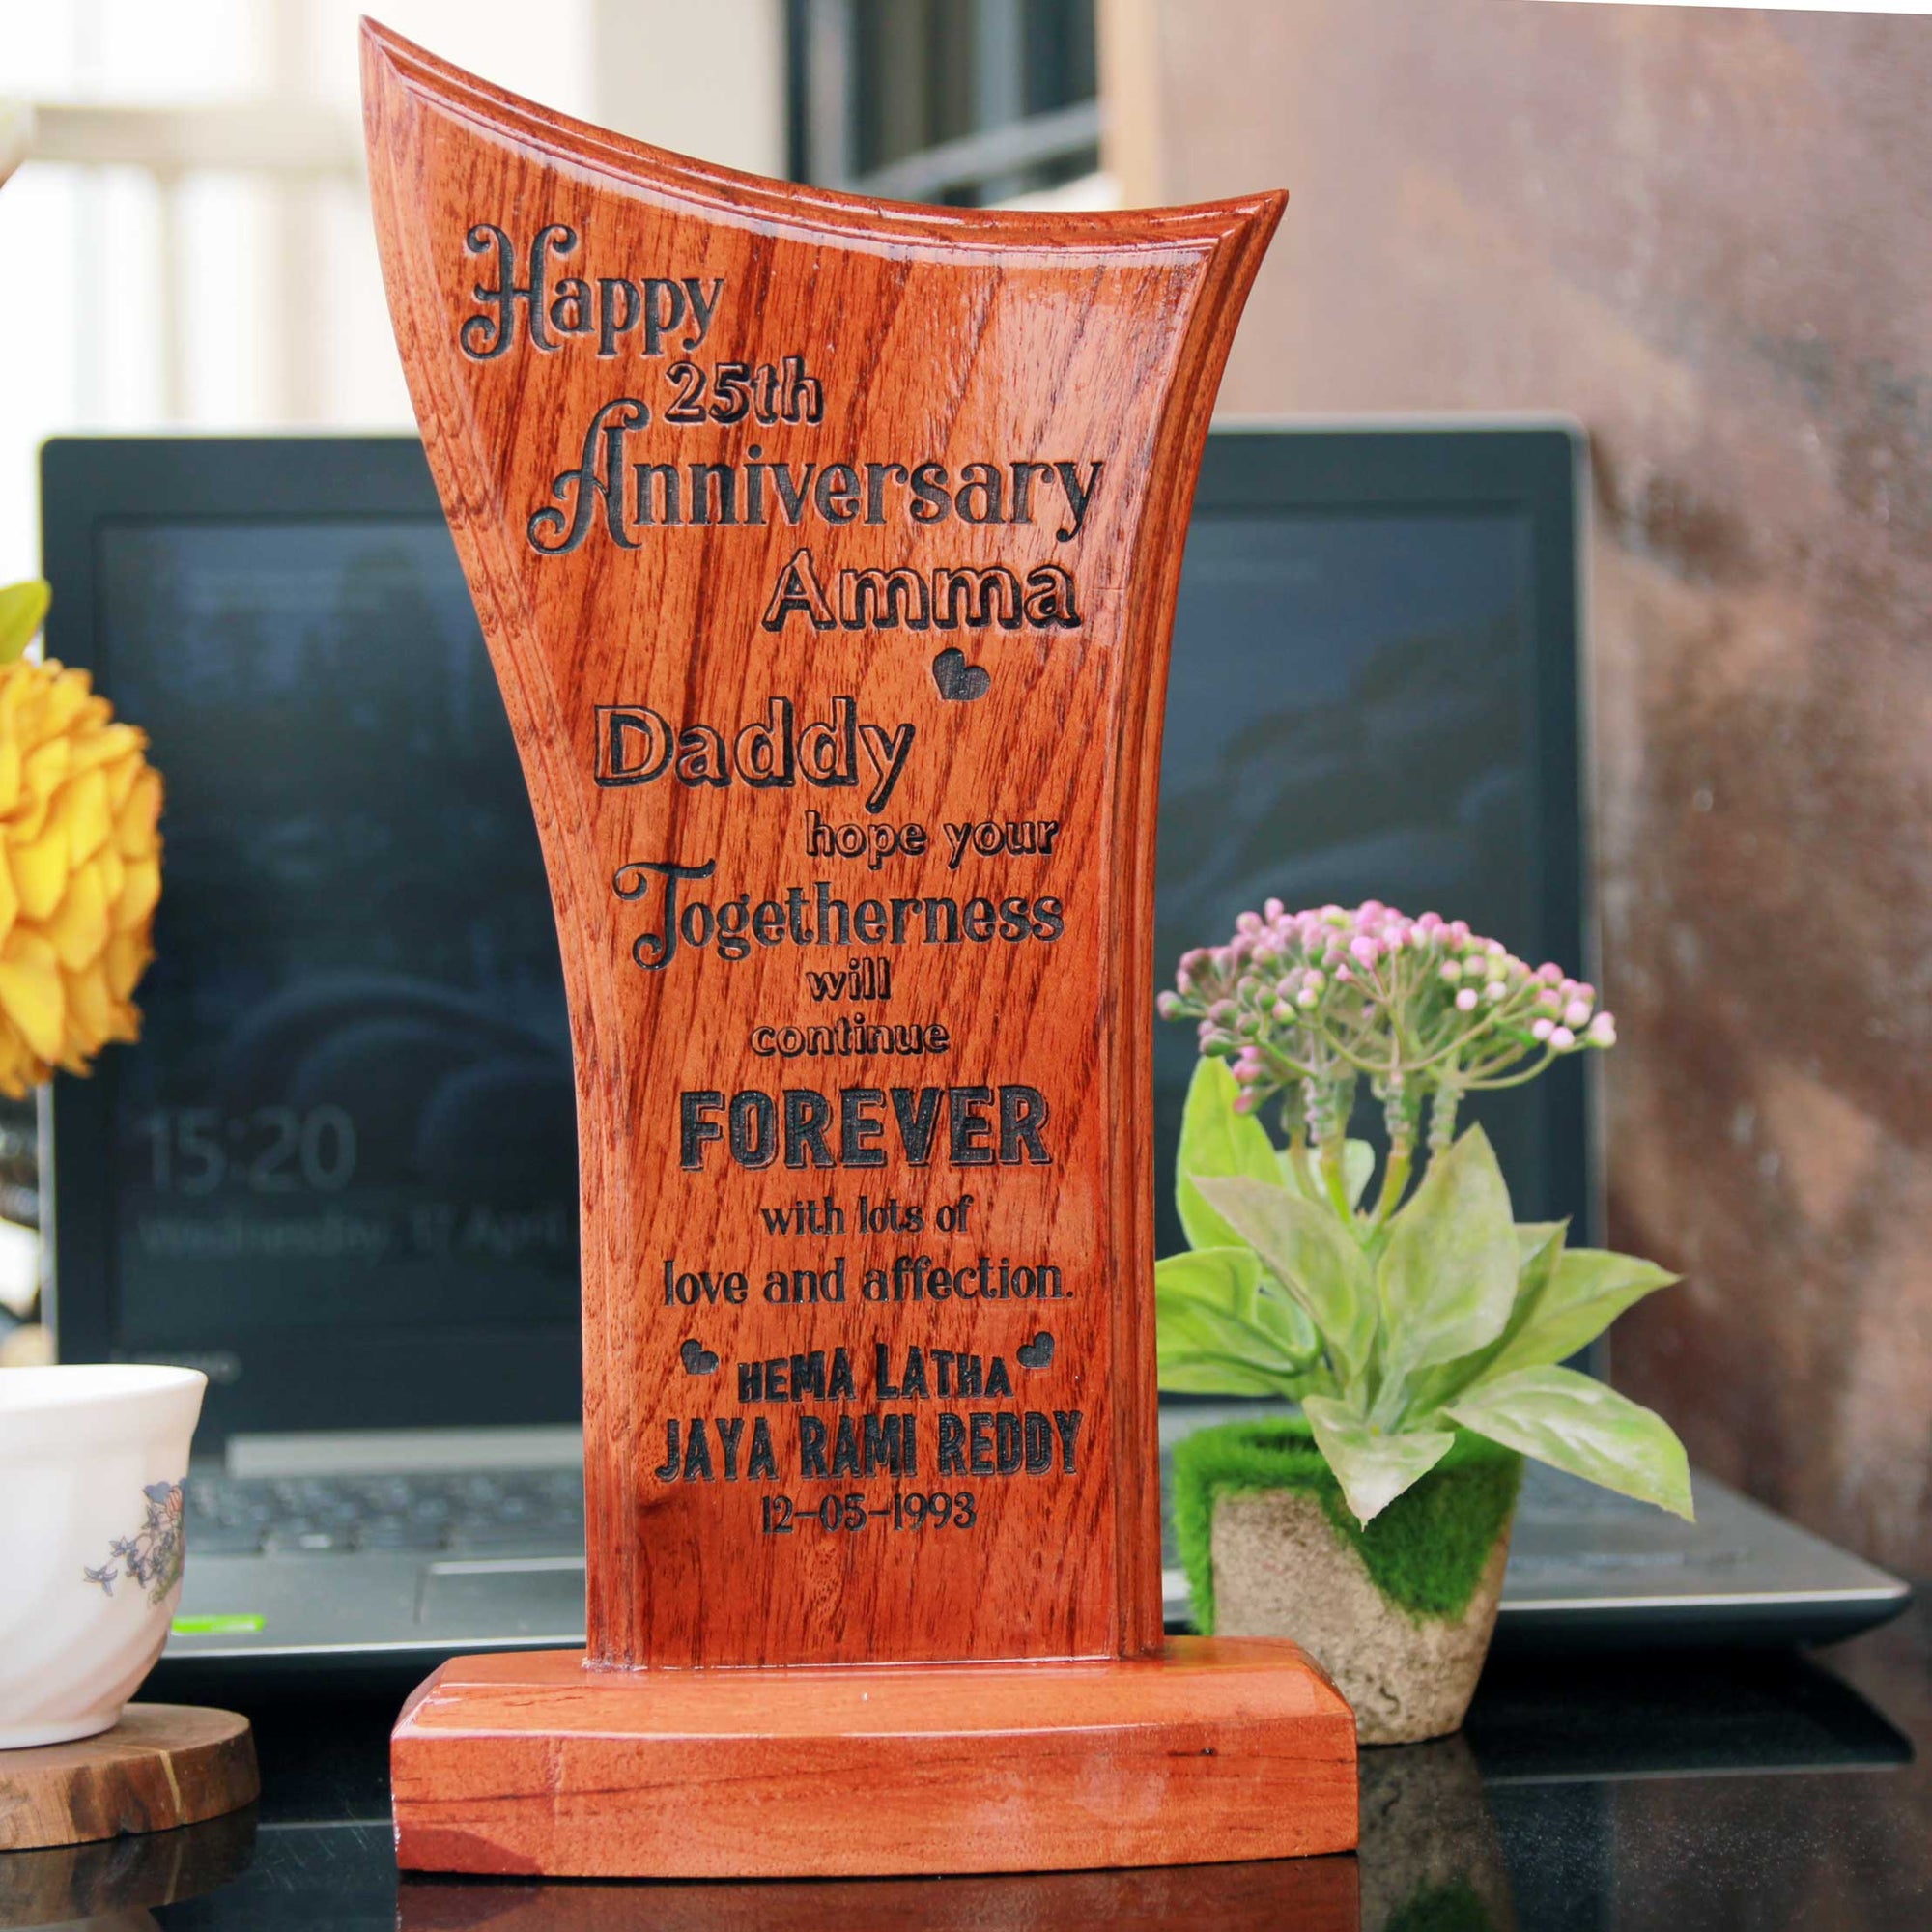 Personalized Wooden Anniversary Award Standee | 25th Anniversary Gift